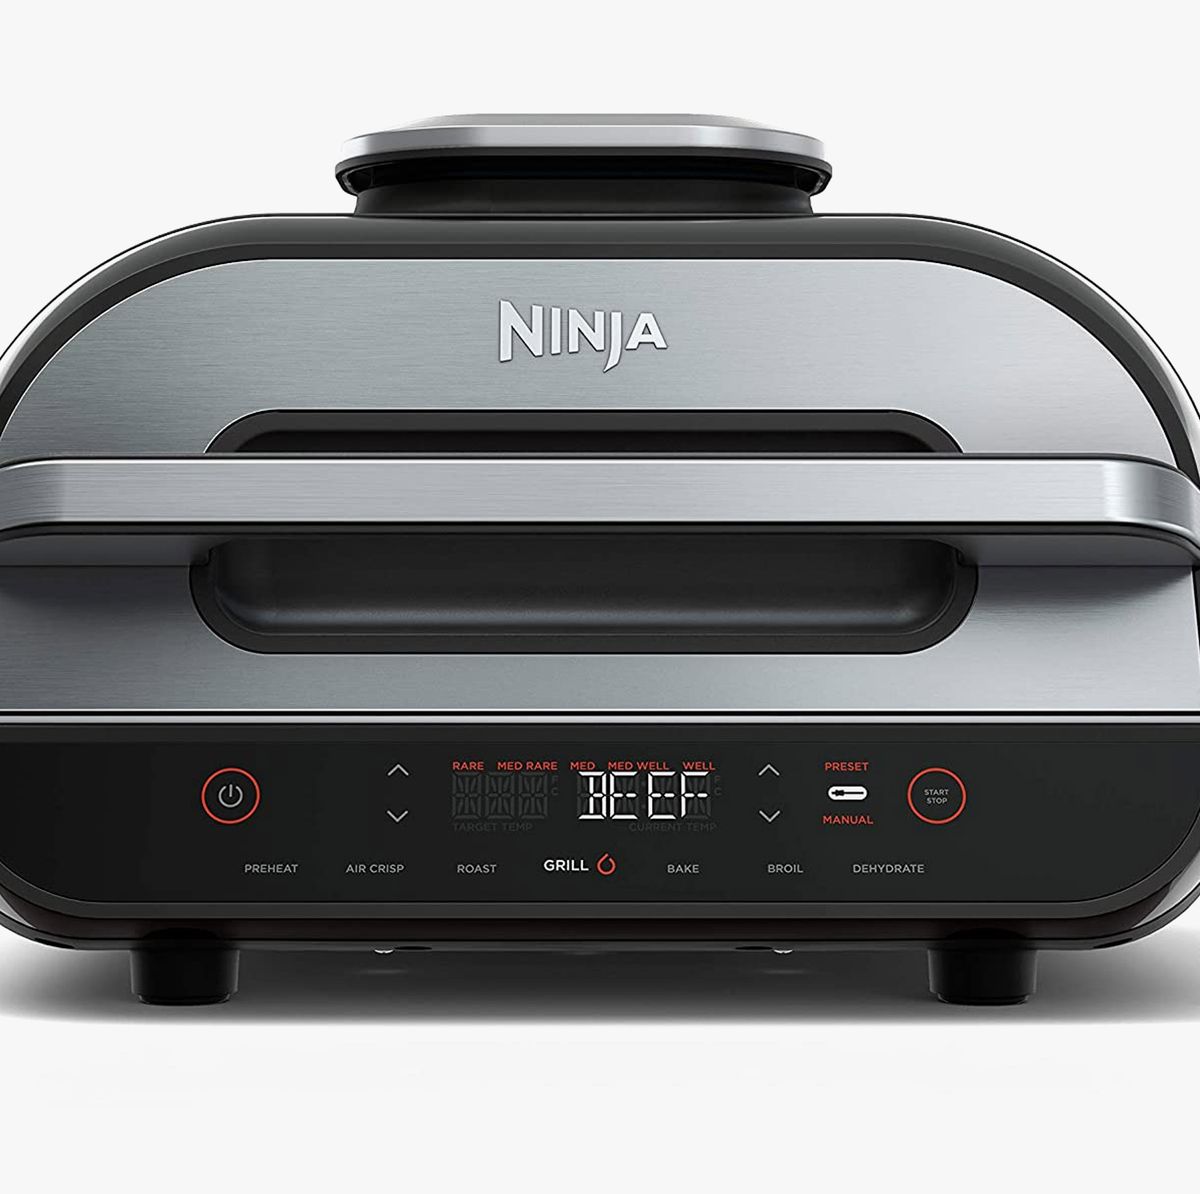 Ninja Foodi Grill Review: We Tried All 5 Of The Internet-Famous